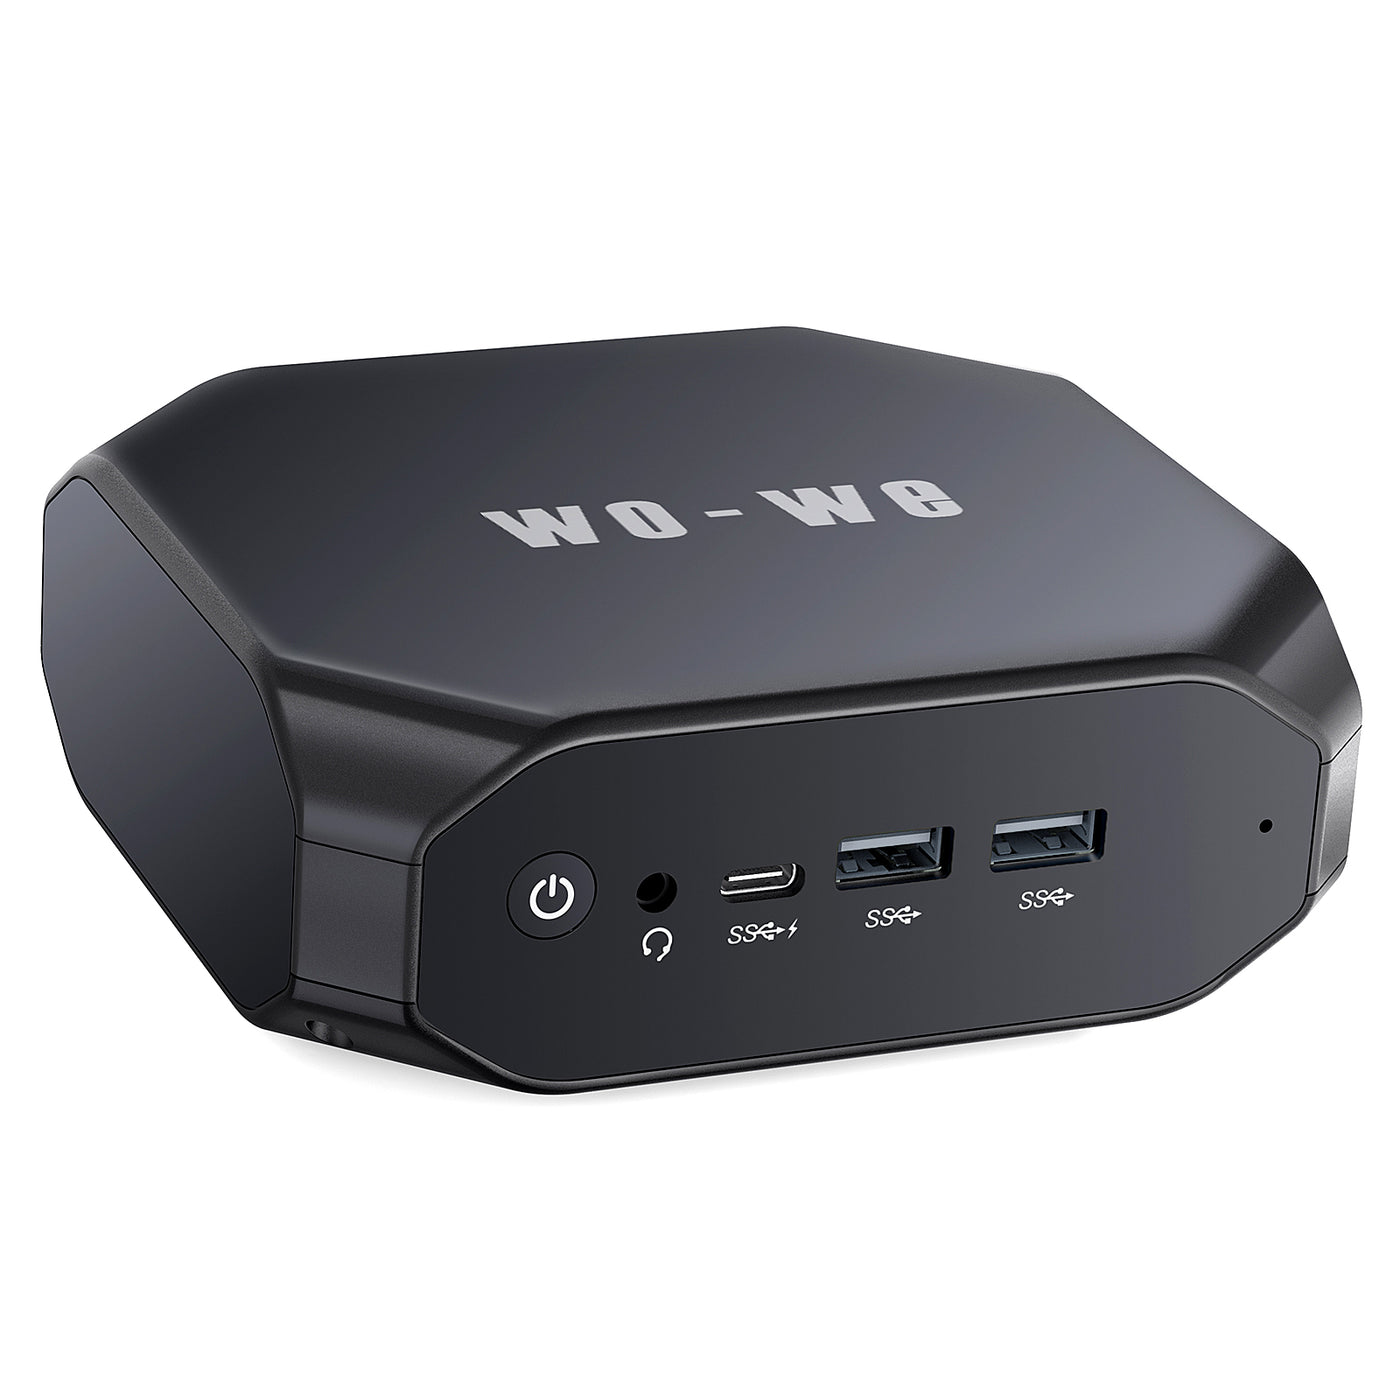 wo-we Mini PC with AMD Excavator A9-9400 up to Radeon R5 Serie